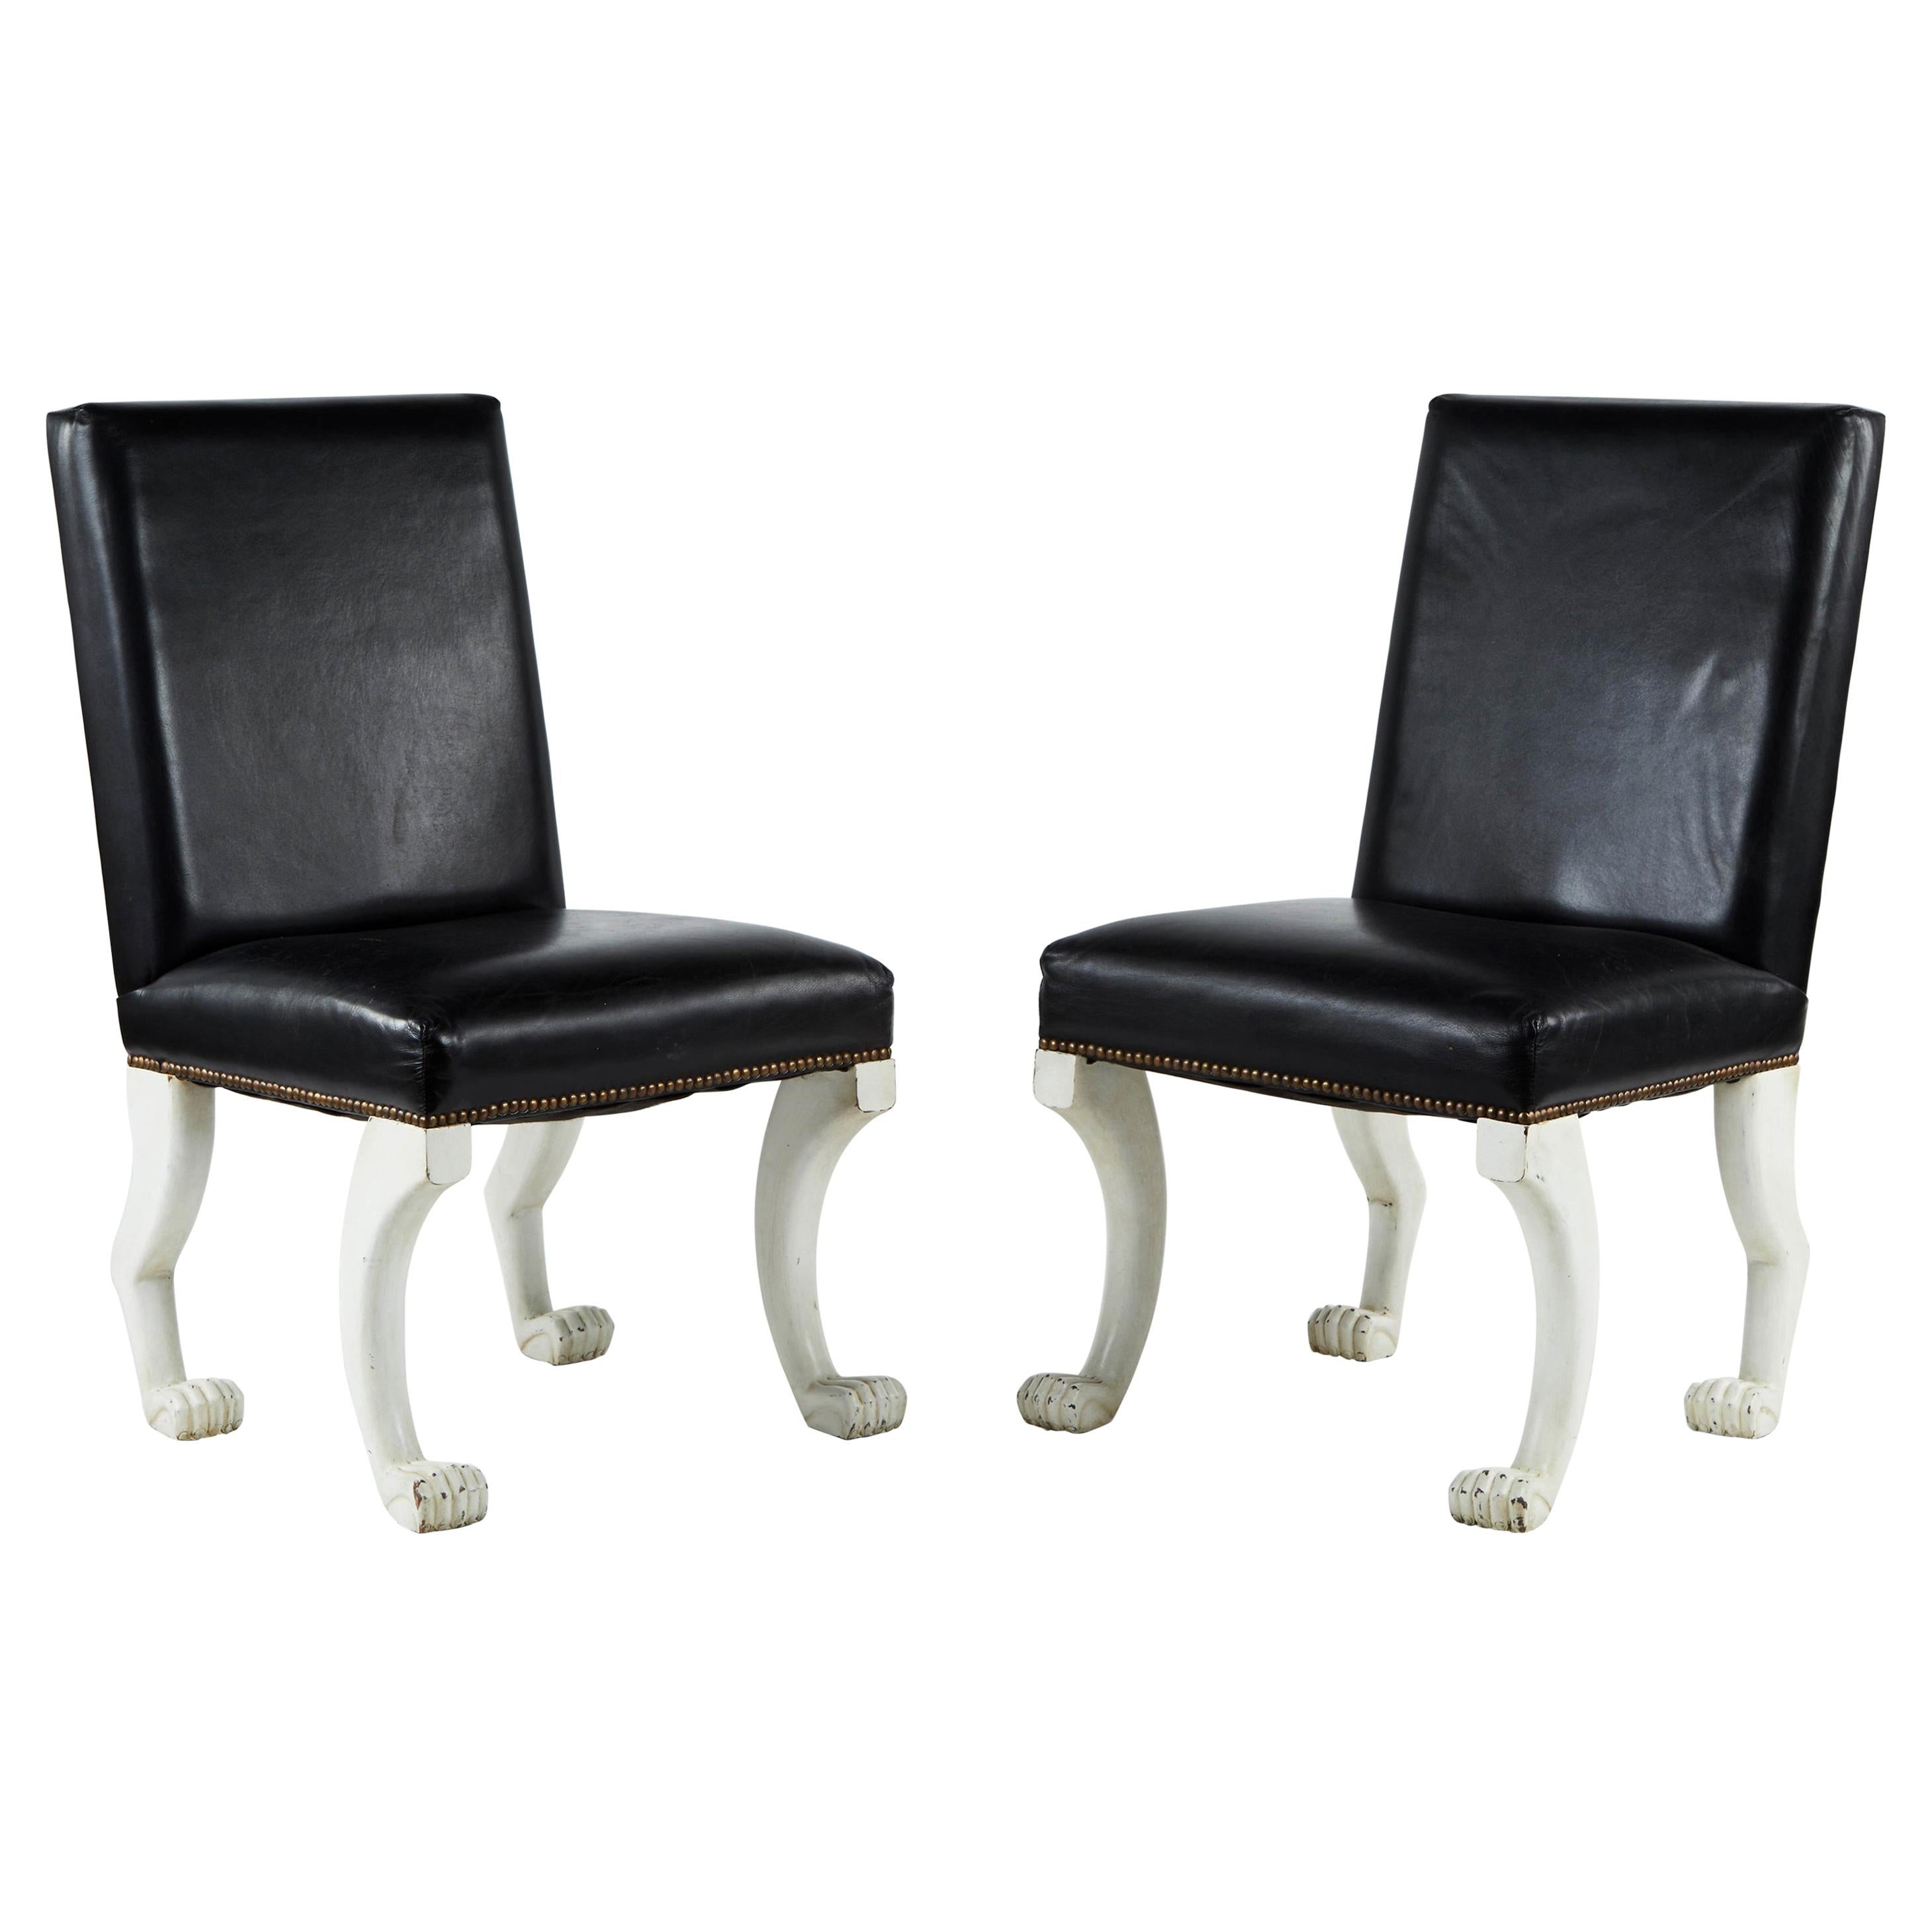 Pair of Leather Paw-Foot Chairs